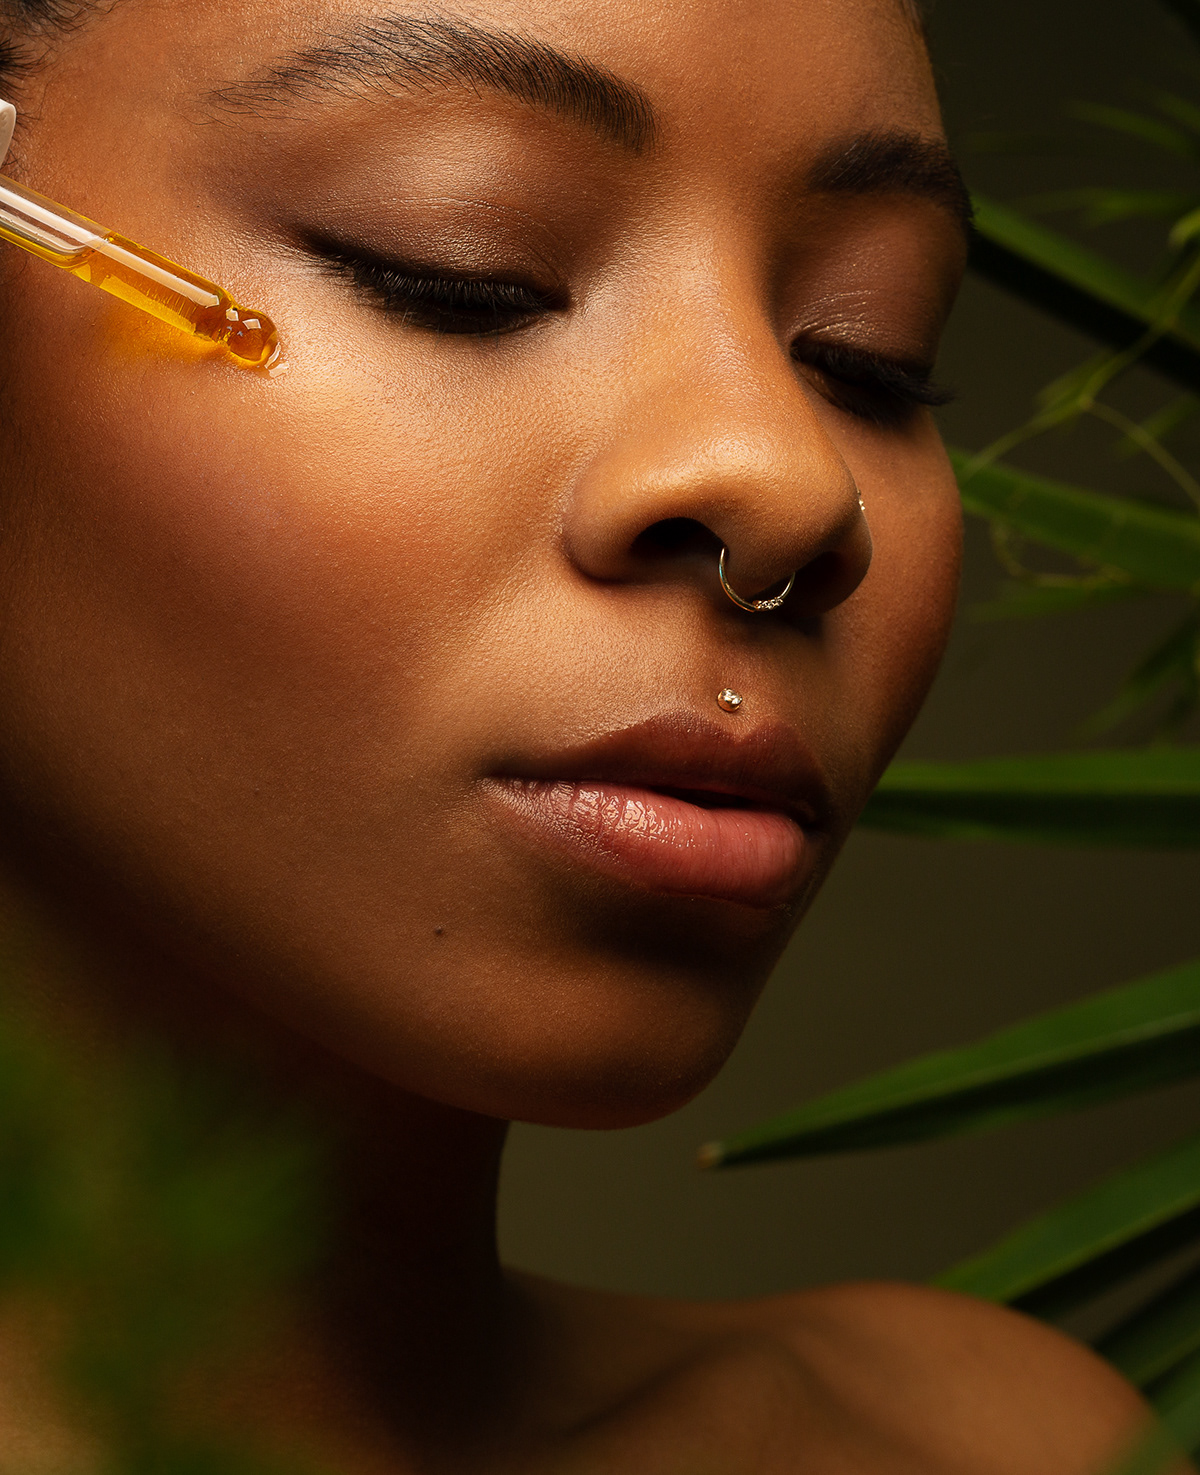 Close up beauty portrait of black skin and face serum by woman photographers Ella Sophie, Oakland